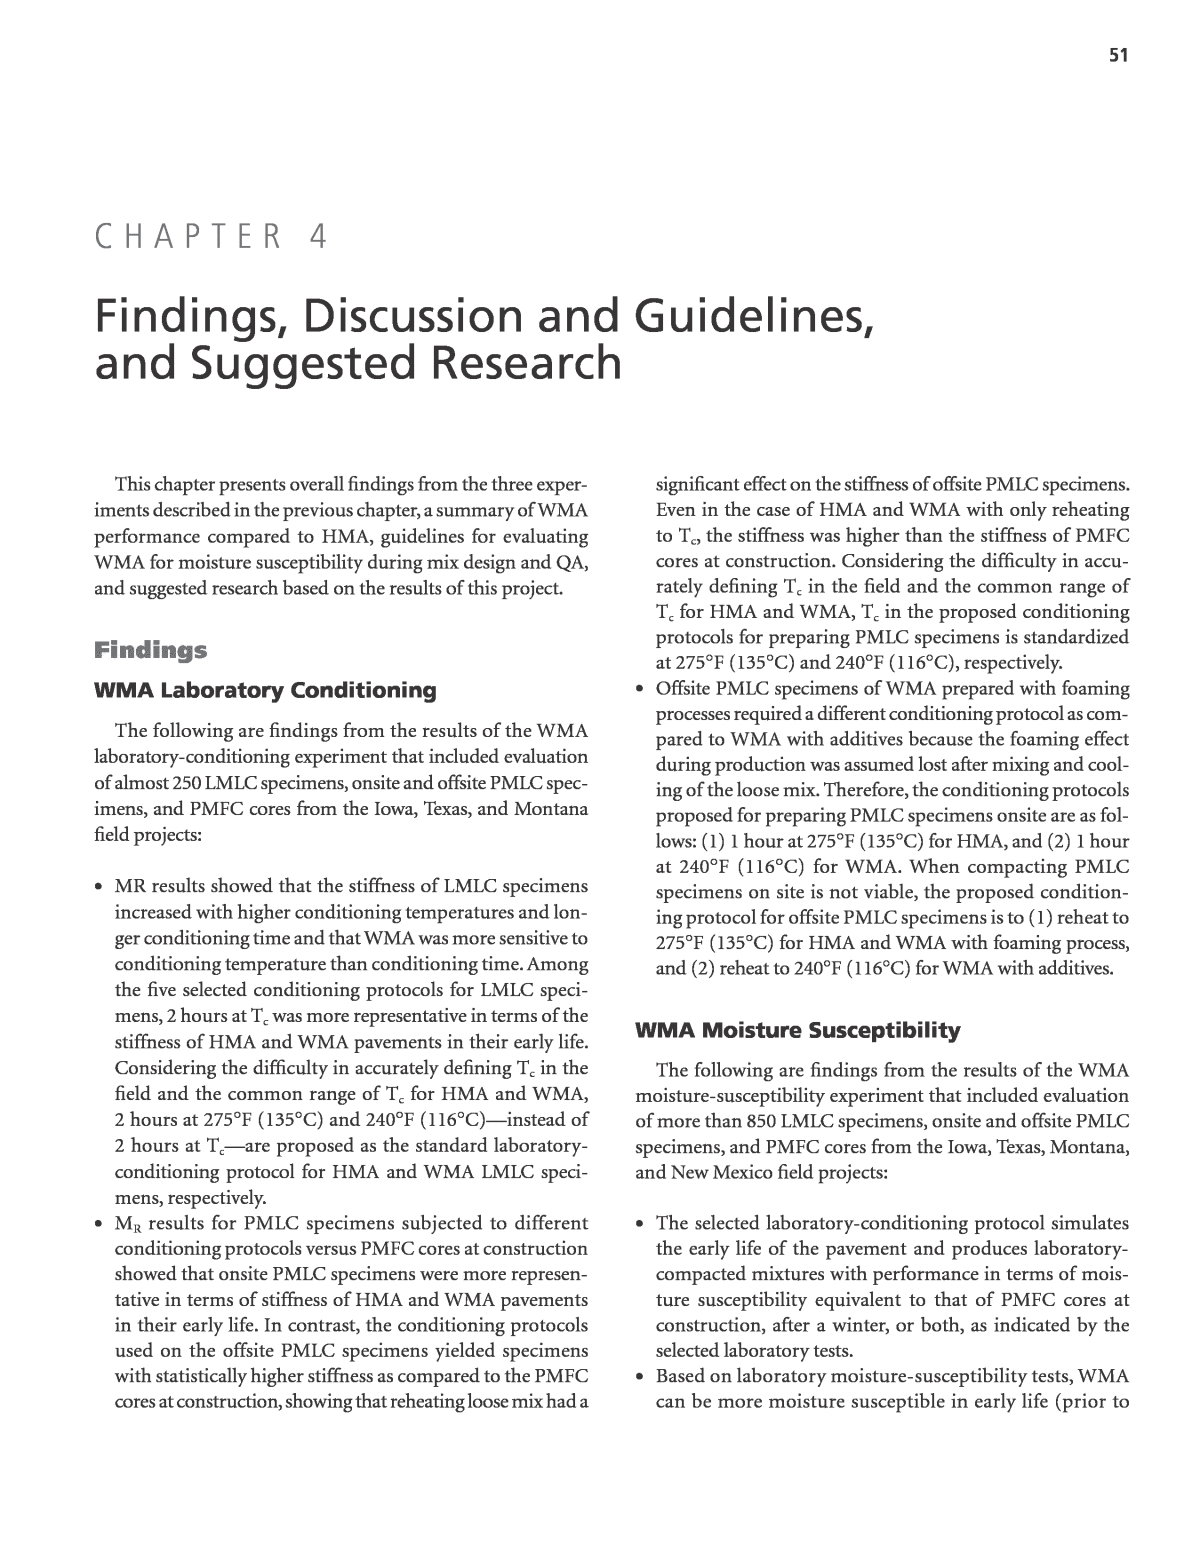 research findings and discussion